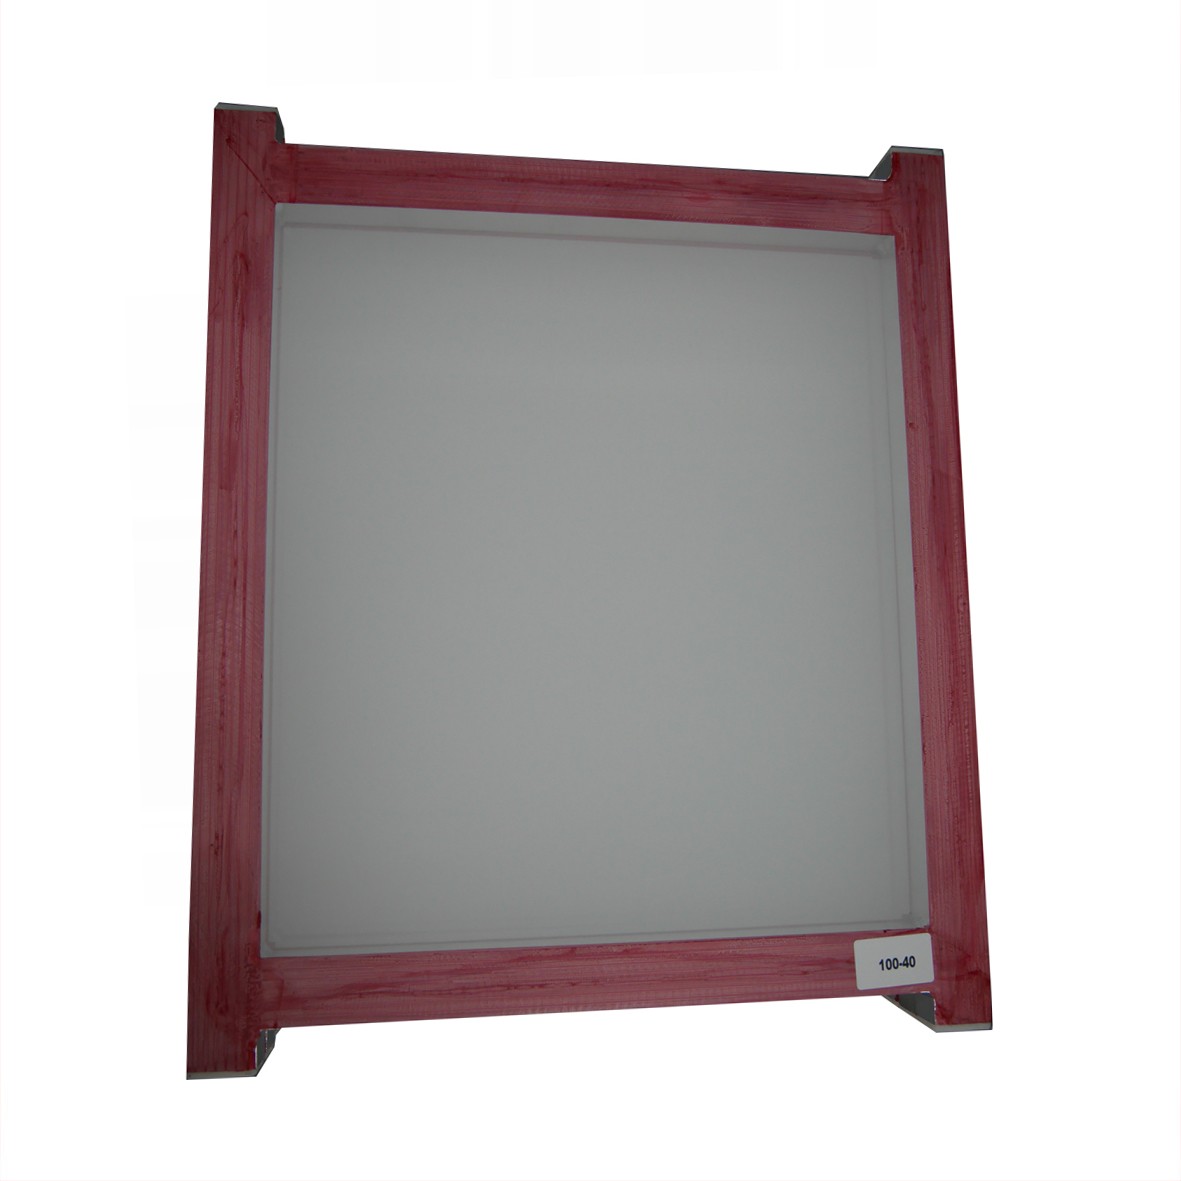 16x22inch line table printing frame with mesh